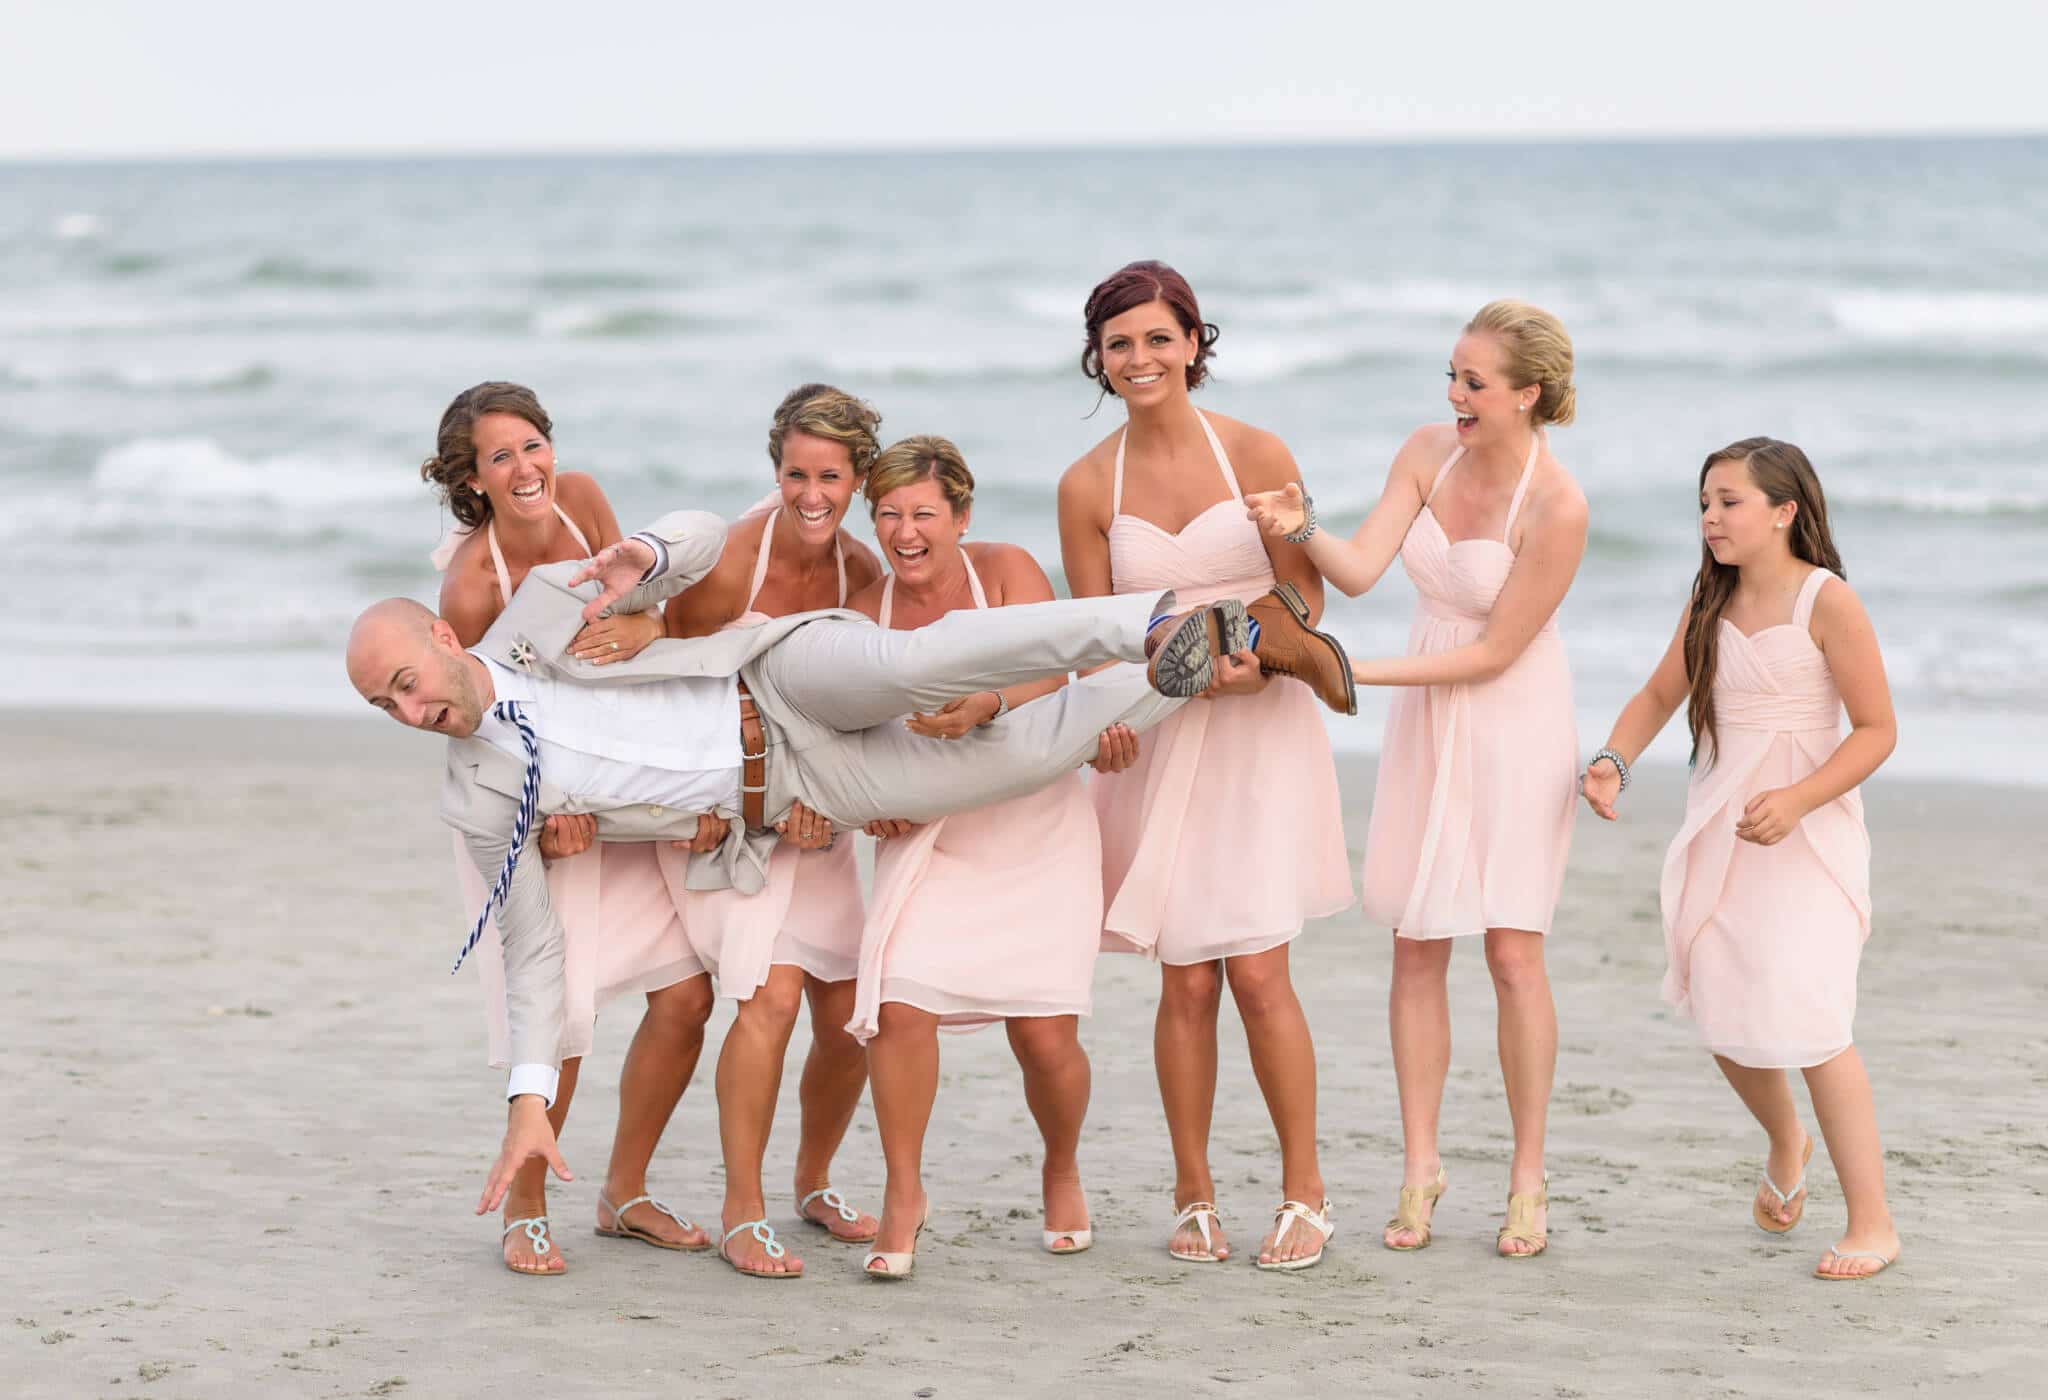 Bridesmaids dropping the groom on the beach